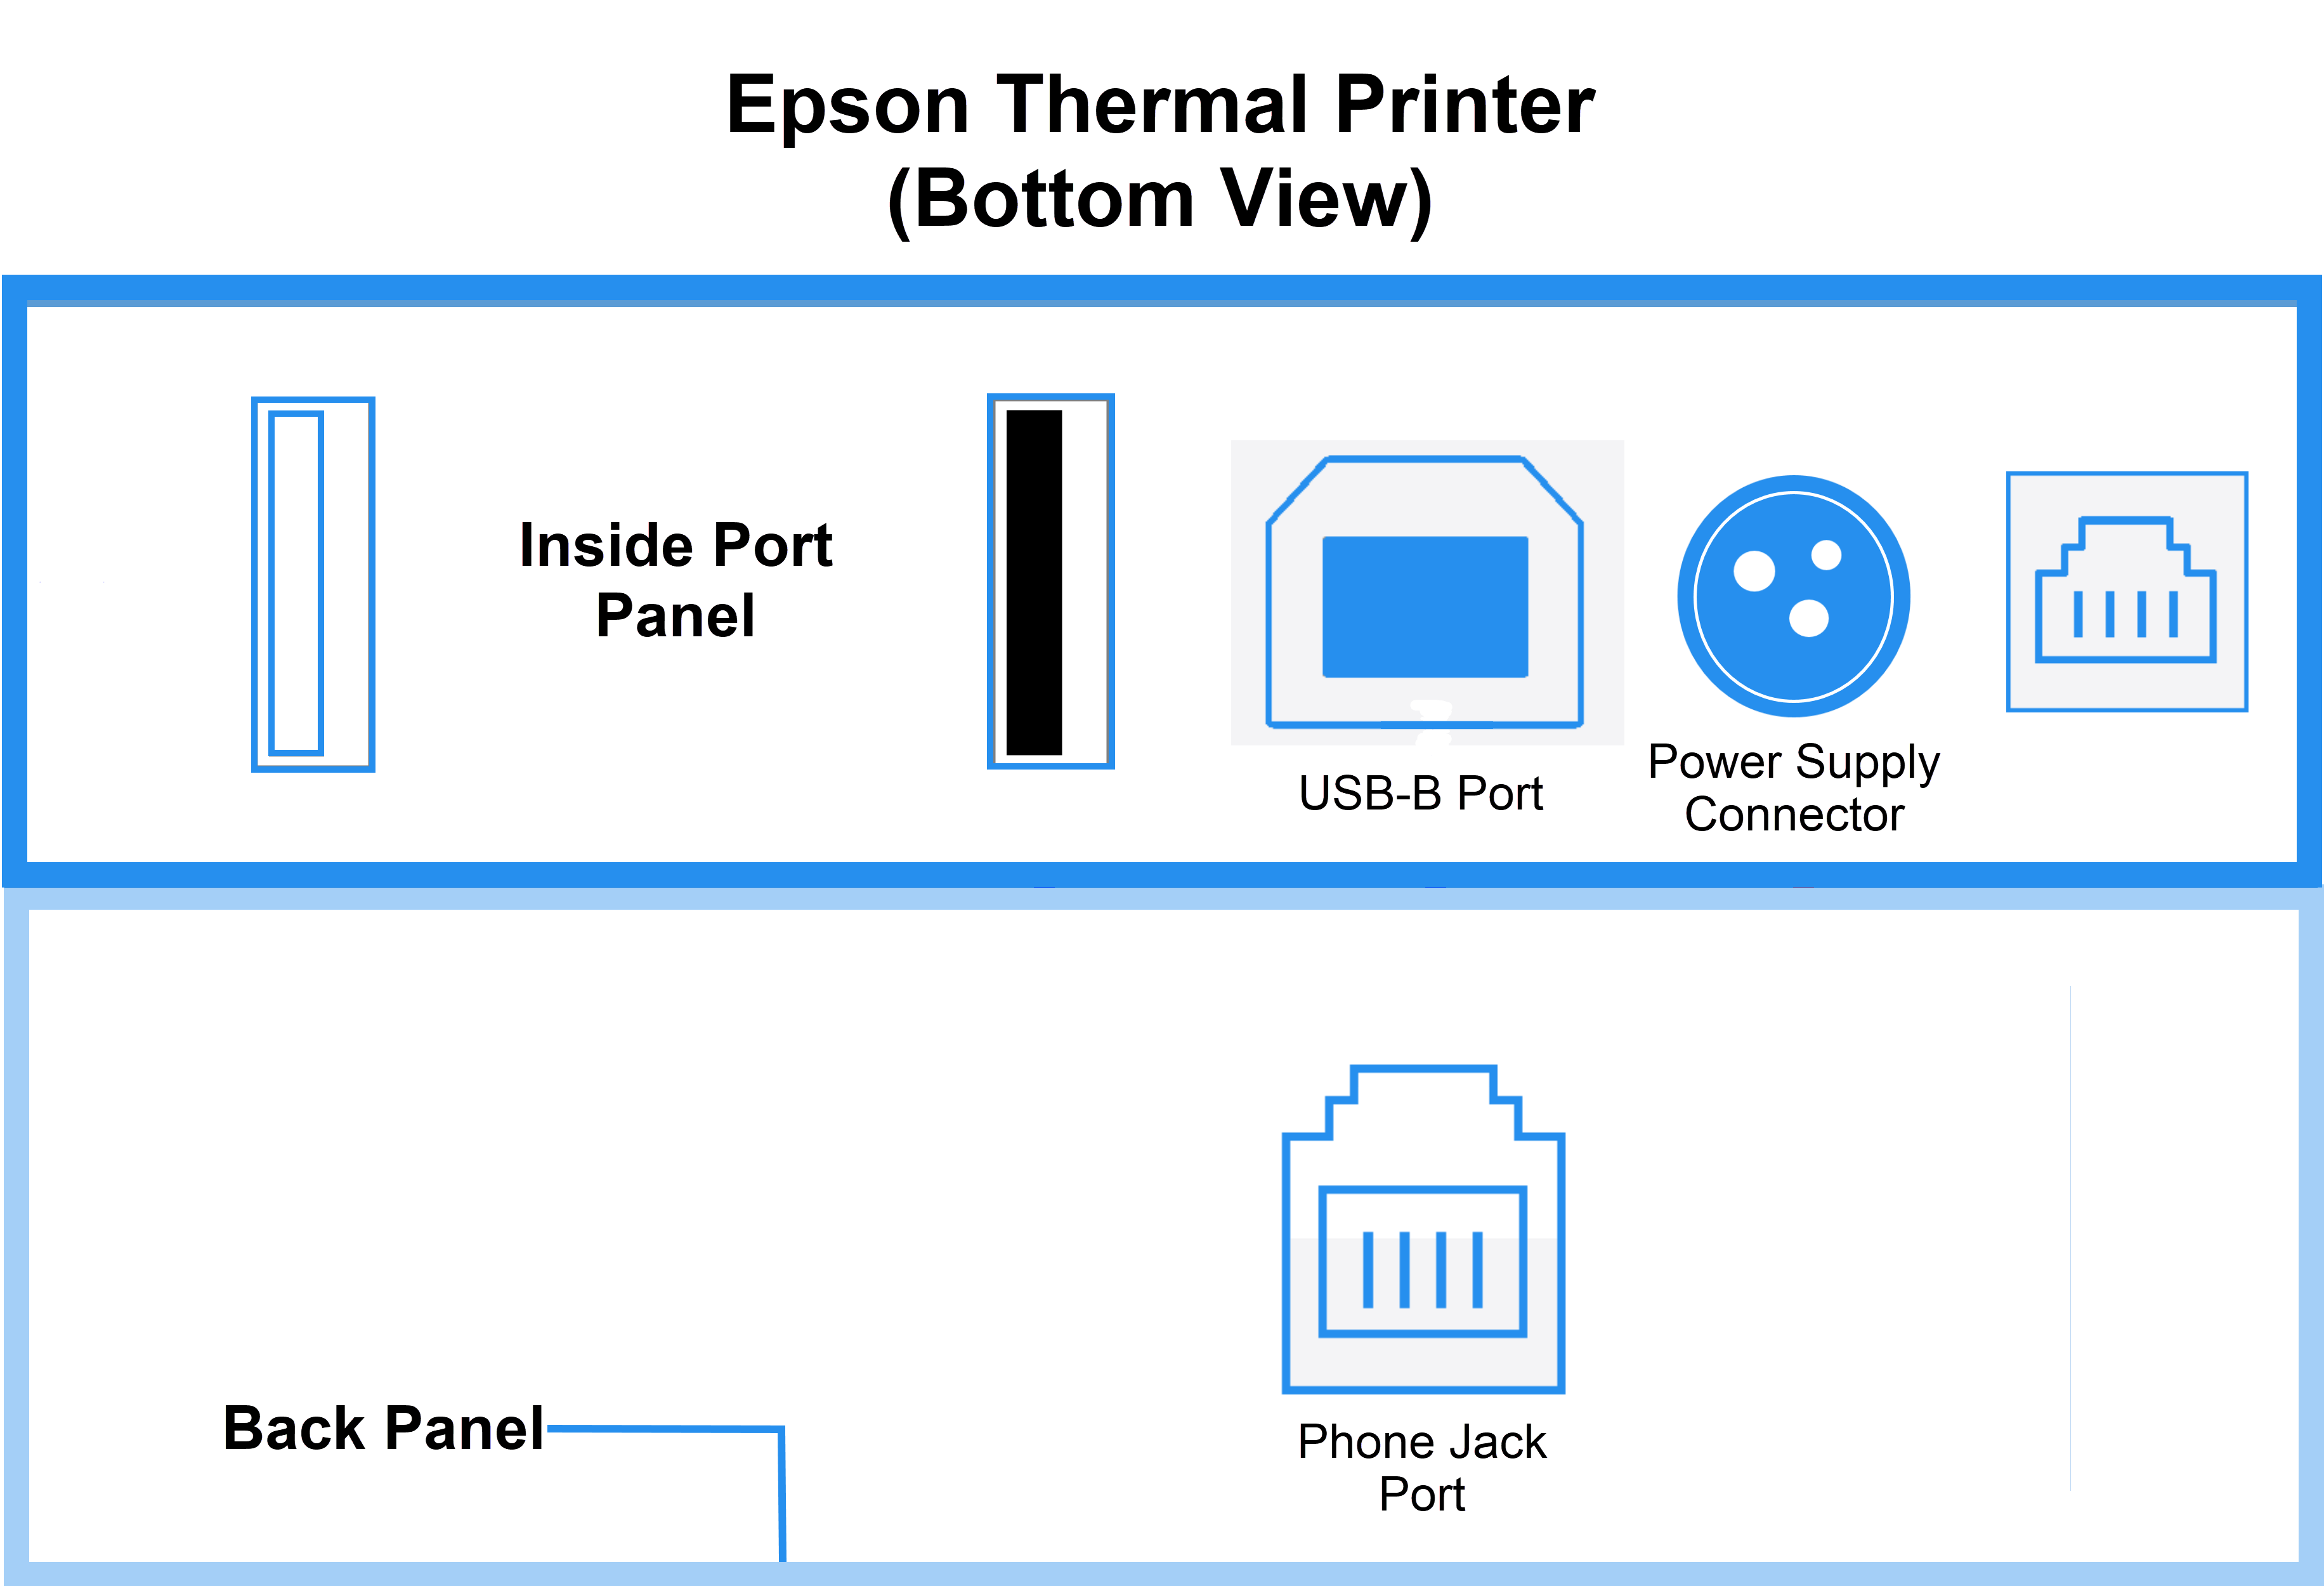 Diagram showing connection ports for epson thermal printer